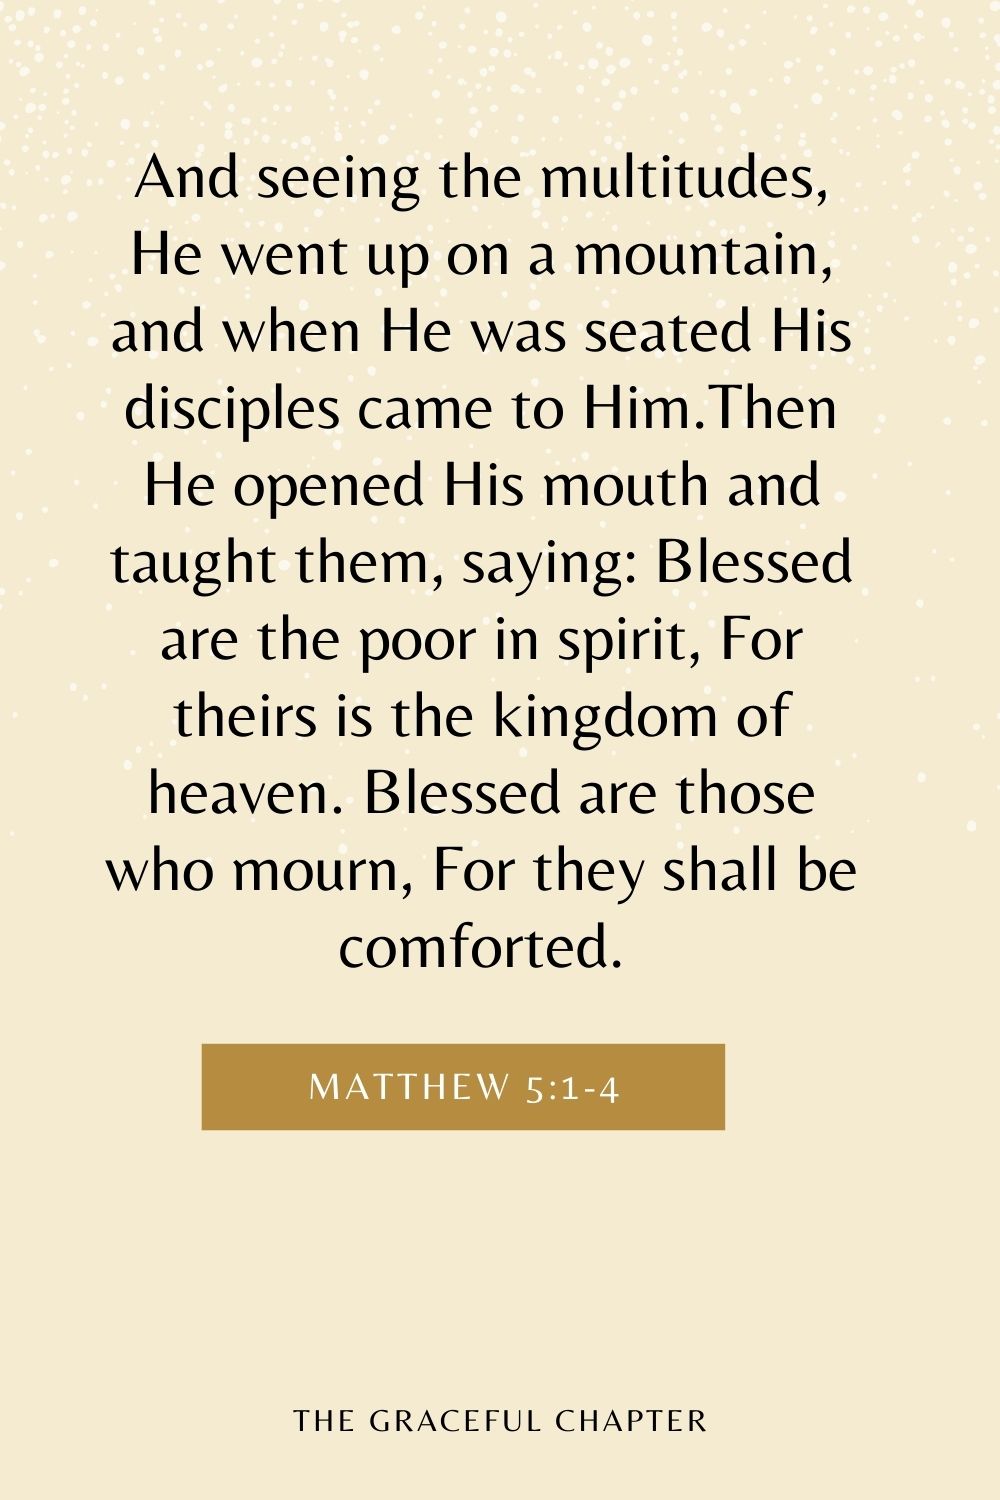 And seeing the multitudes, He went up on a mountain, and when He was seated His disciples came to Him.Then He opened His mouth and taught them, saying: Blessed are the poor in spirit, For theirs is the kingdom of heaven. Blessed are those who mourn, For they shall be comforted. Matthew 5:1-4